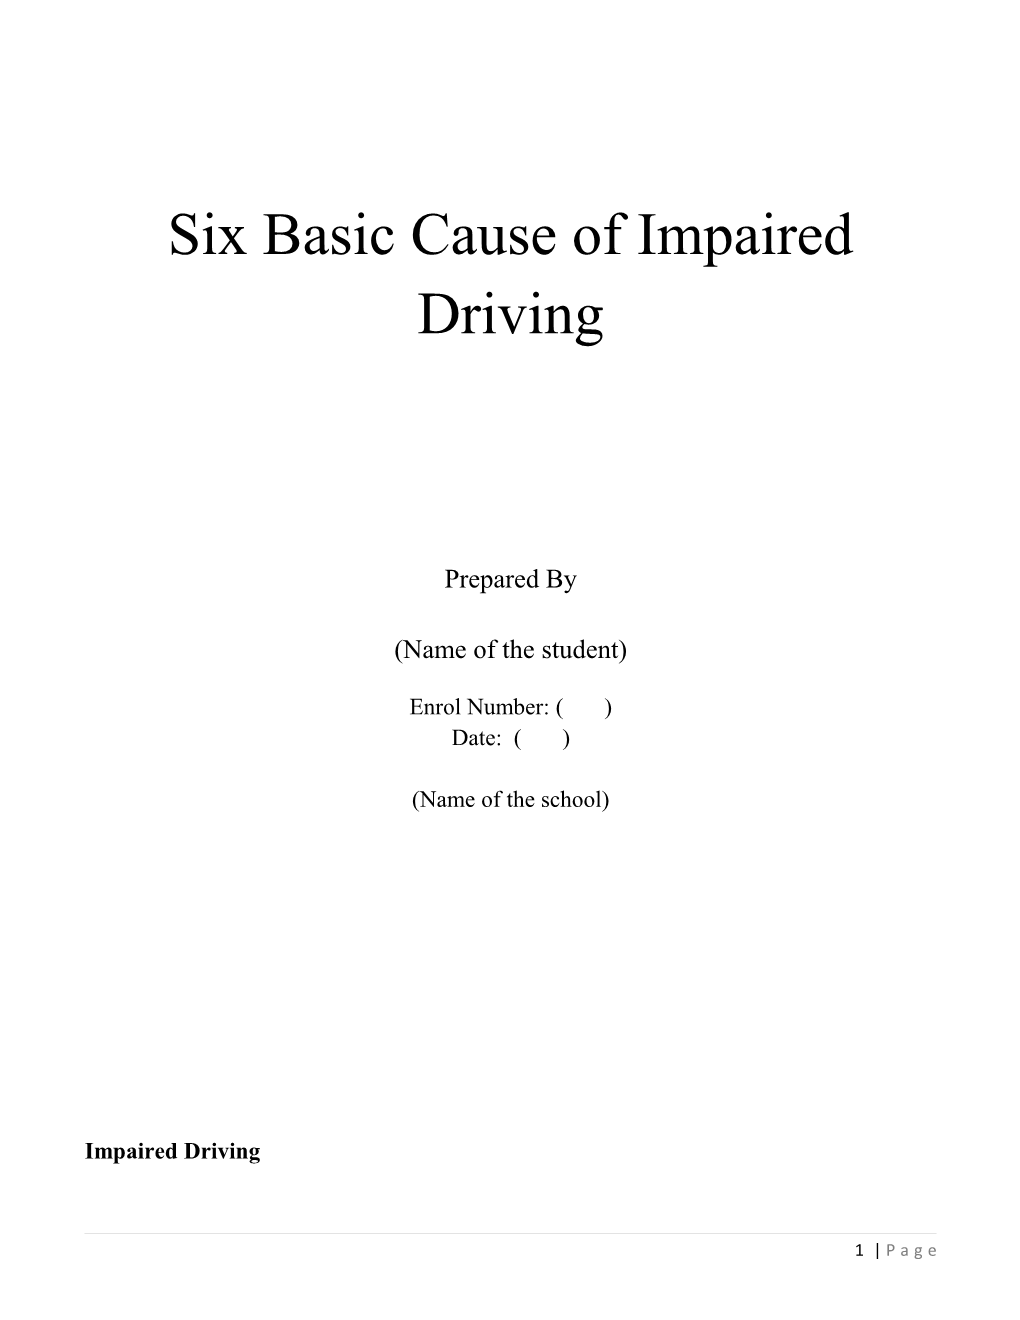 Six Basic Cause of Impaired Driving